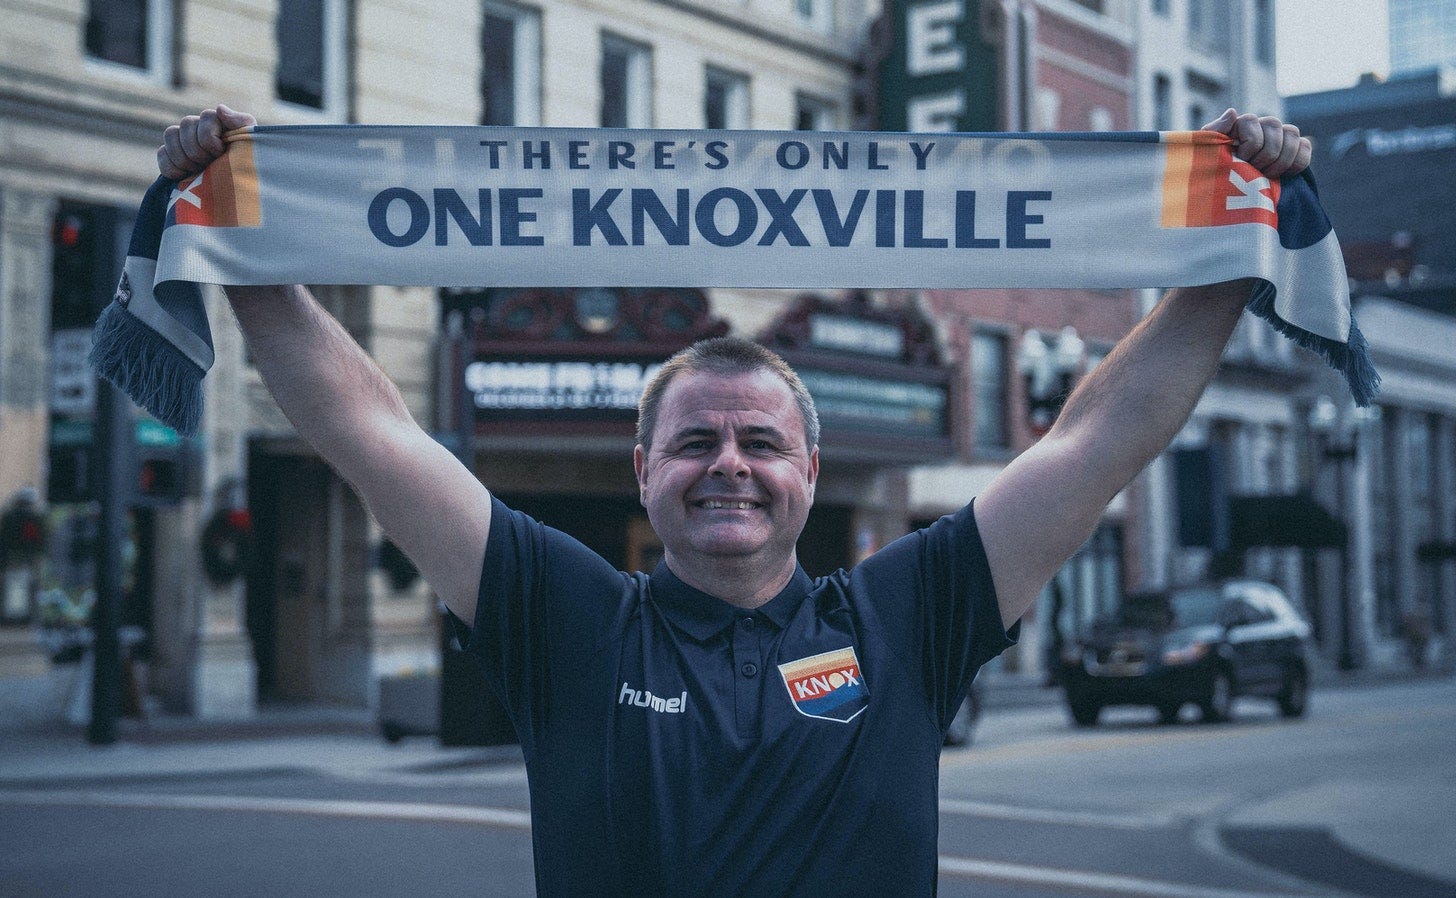 Mark McKeever holds a One Knoxville scarf outside the Tennessee Theatre